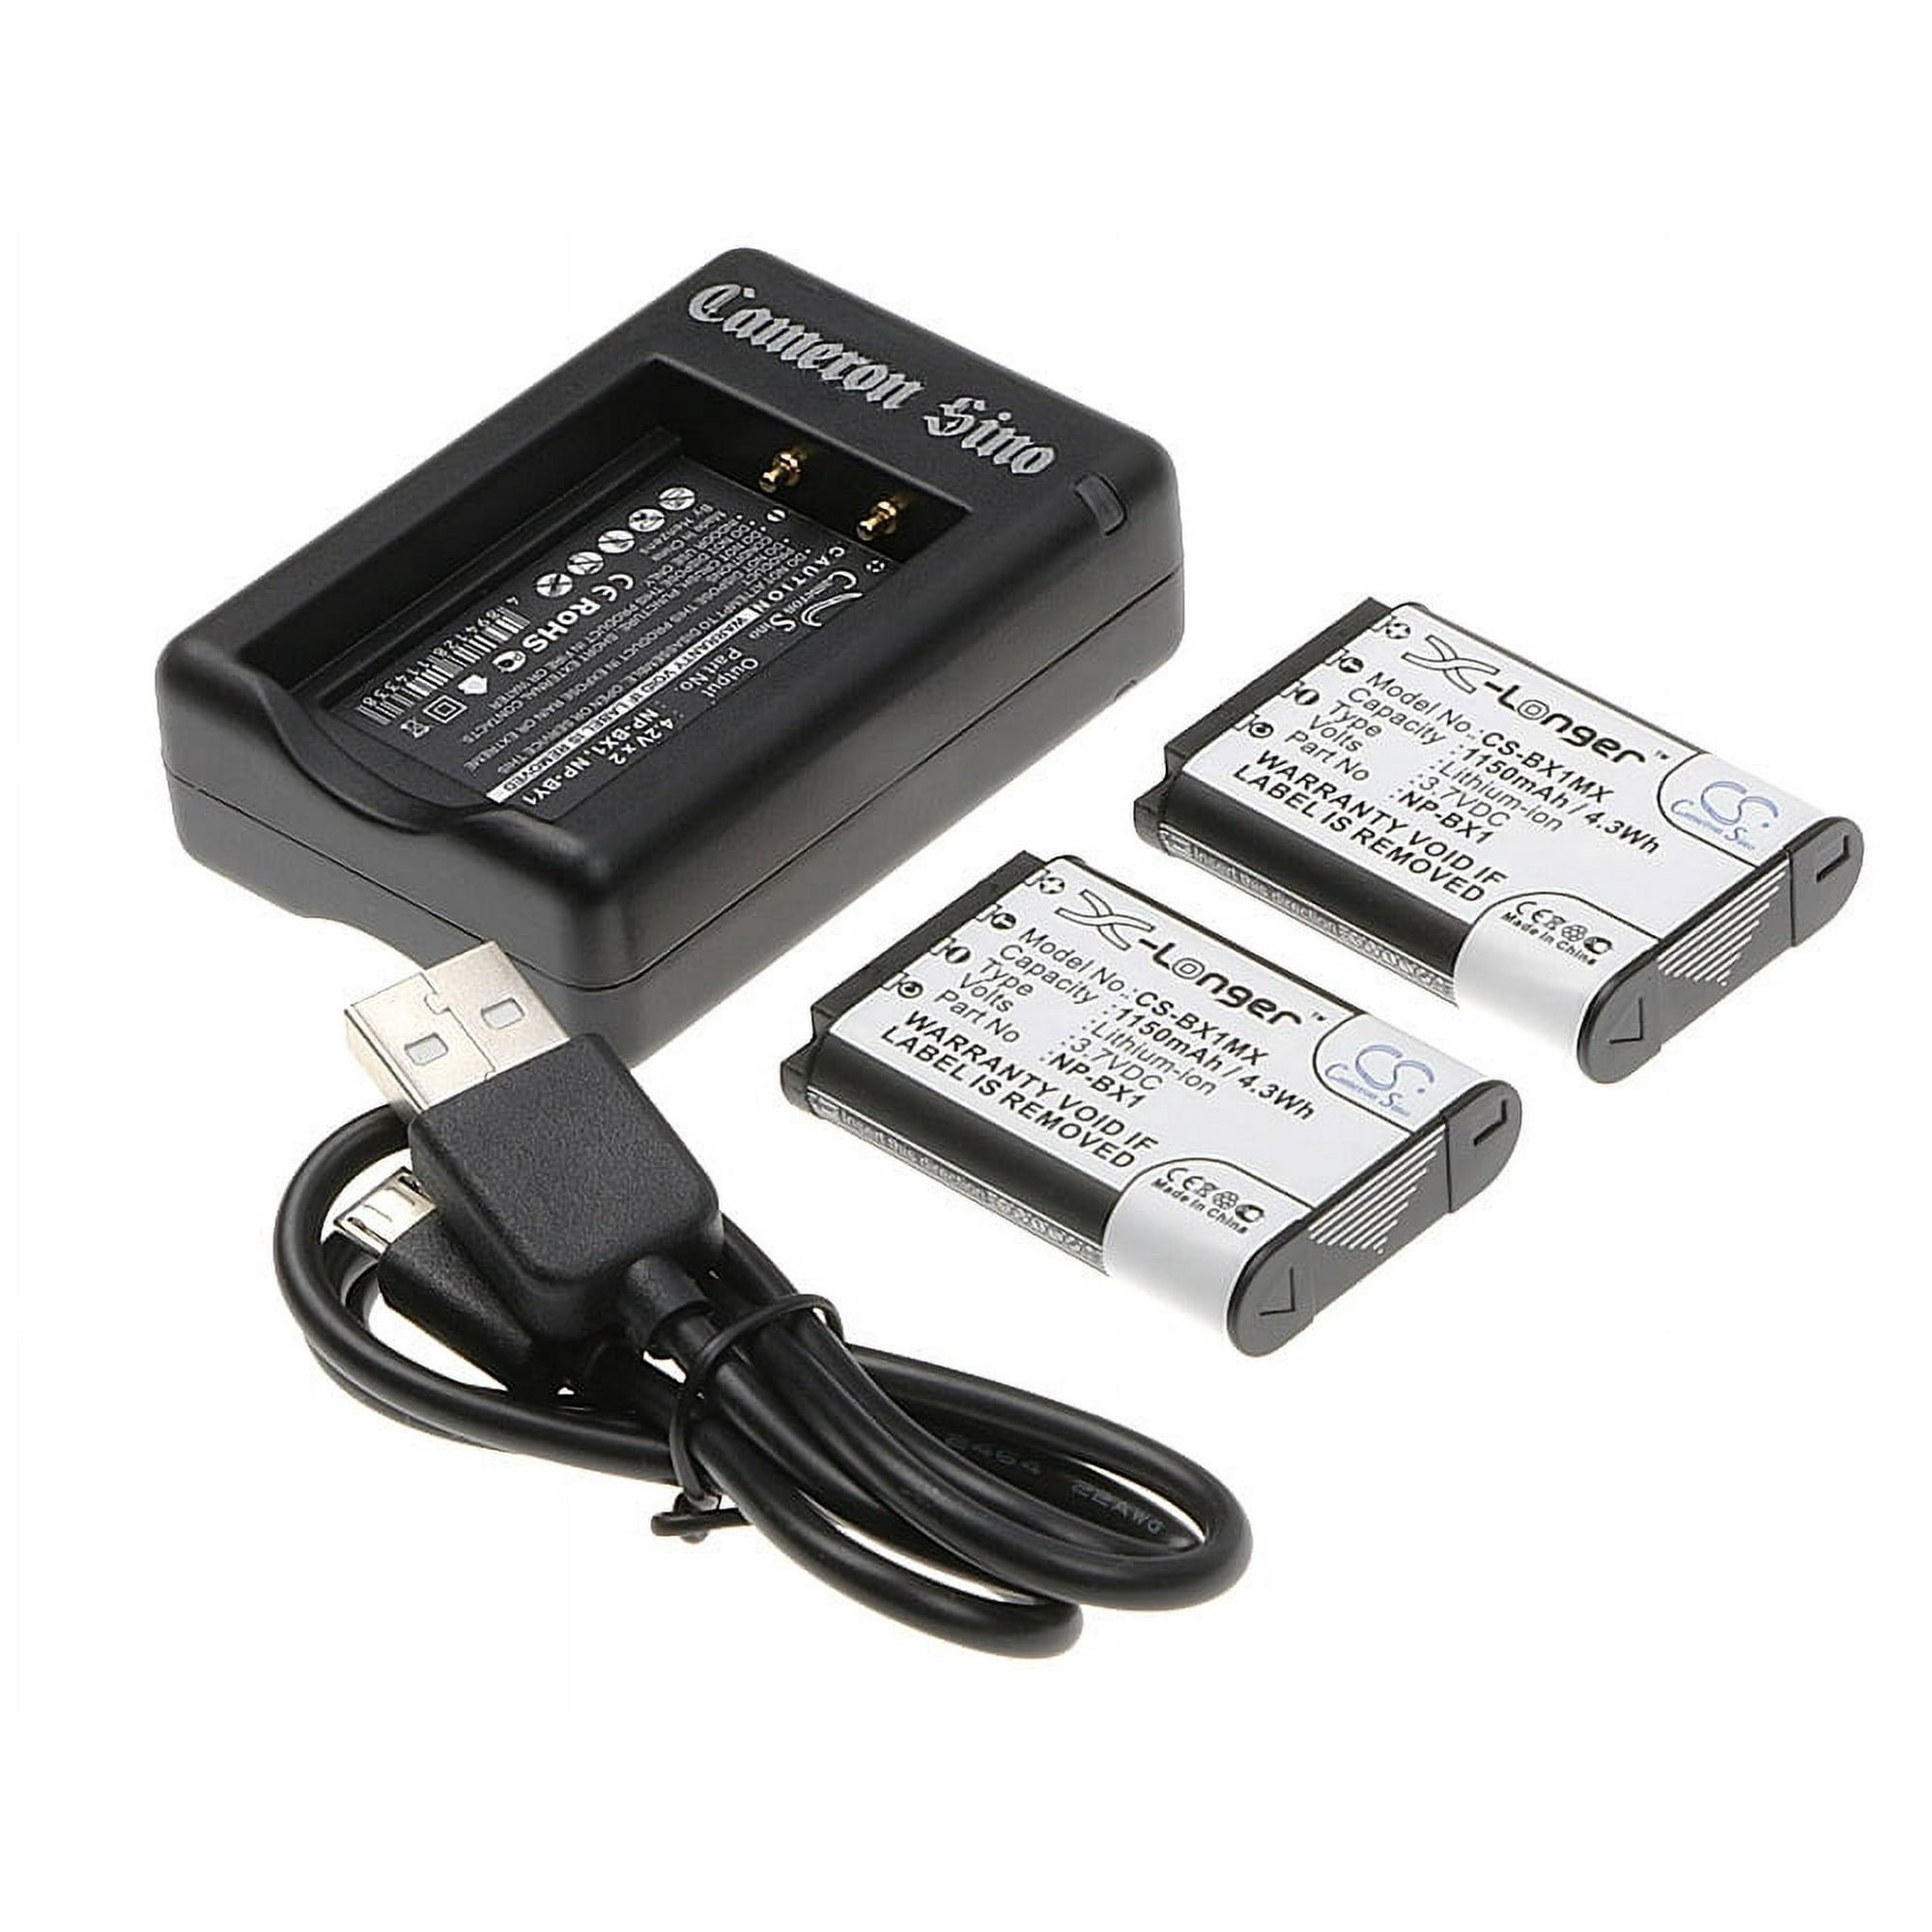 Bundle - 2 x 1150mAh Battery, Charger for Sony HDR-GWP88V, HDR